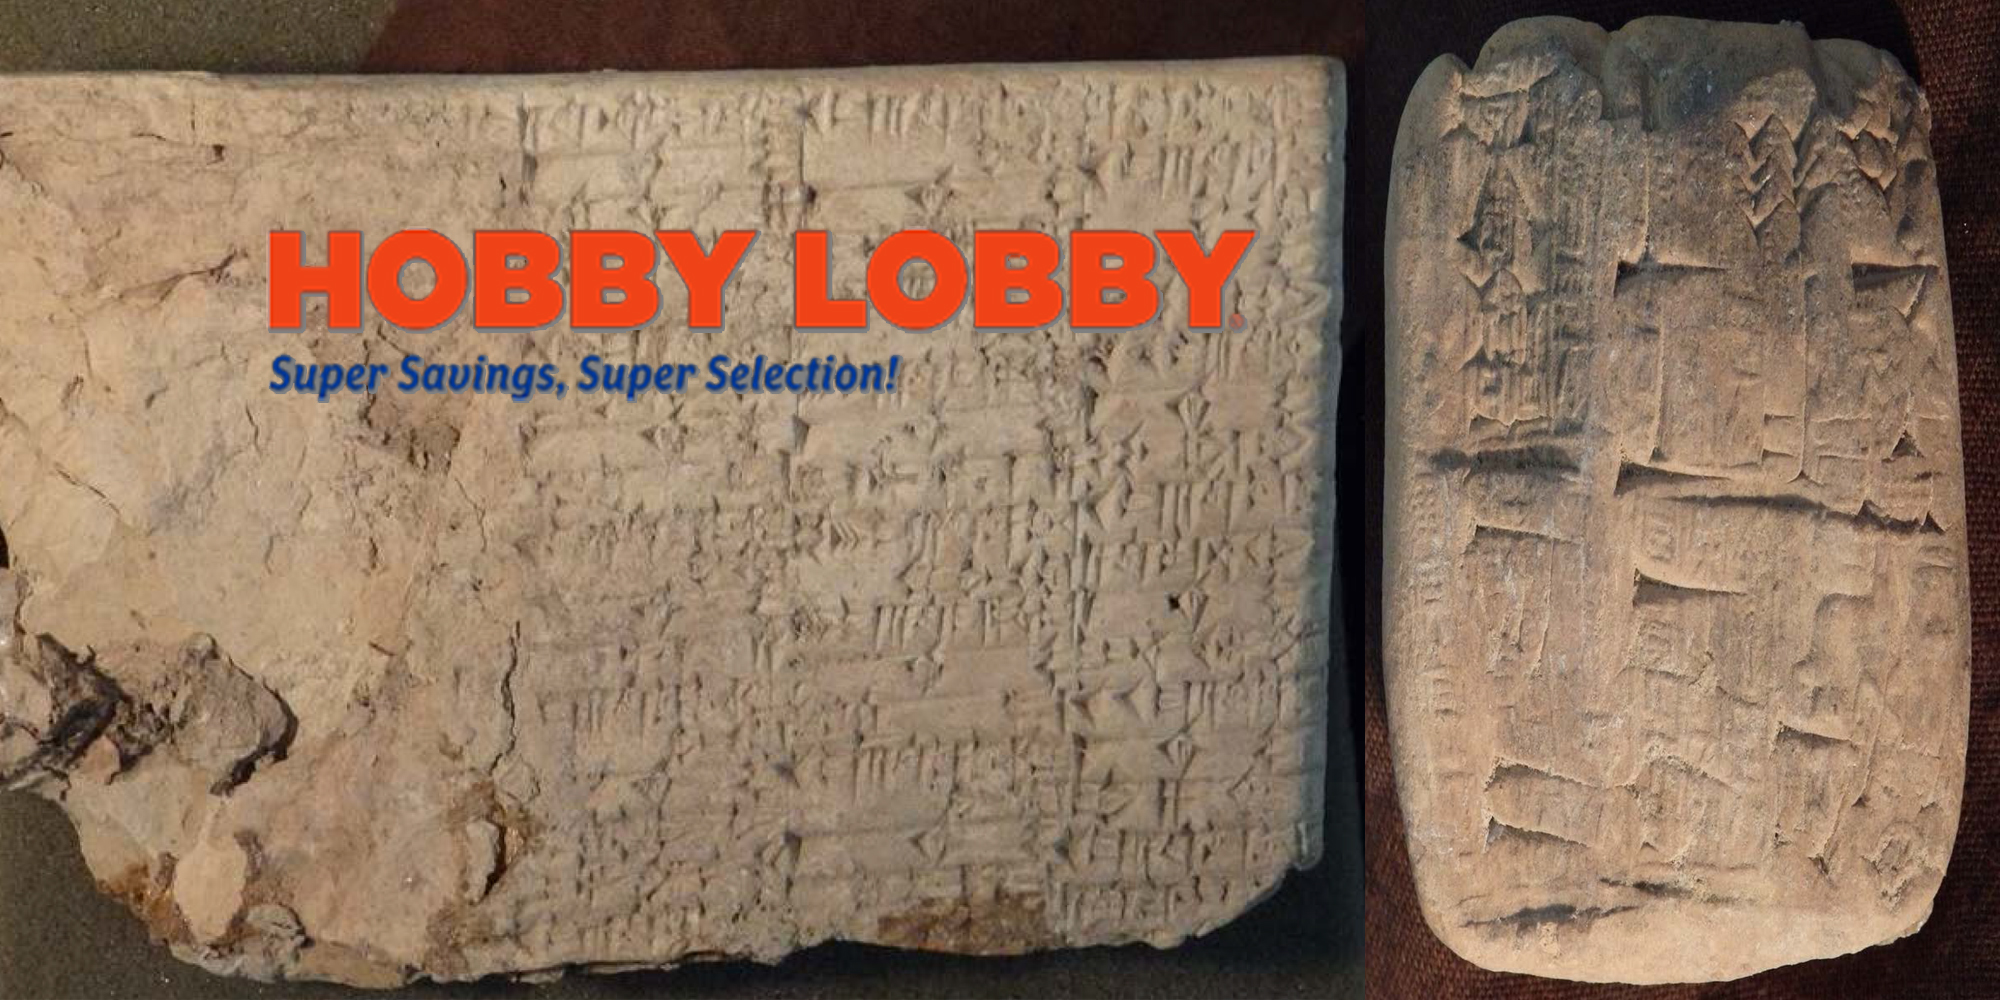 Hobby Lobby Agrees To Turn Over Thousands Of Ancient Iraqi Artifacts That Were Smuggled Into U.S.